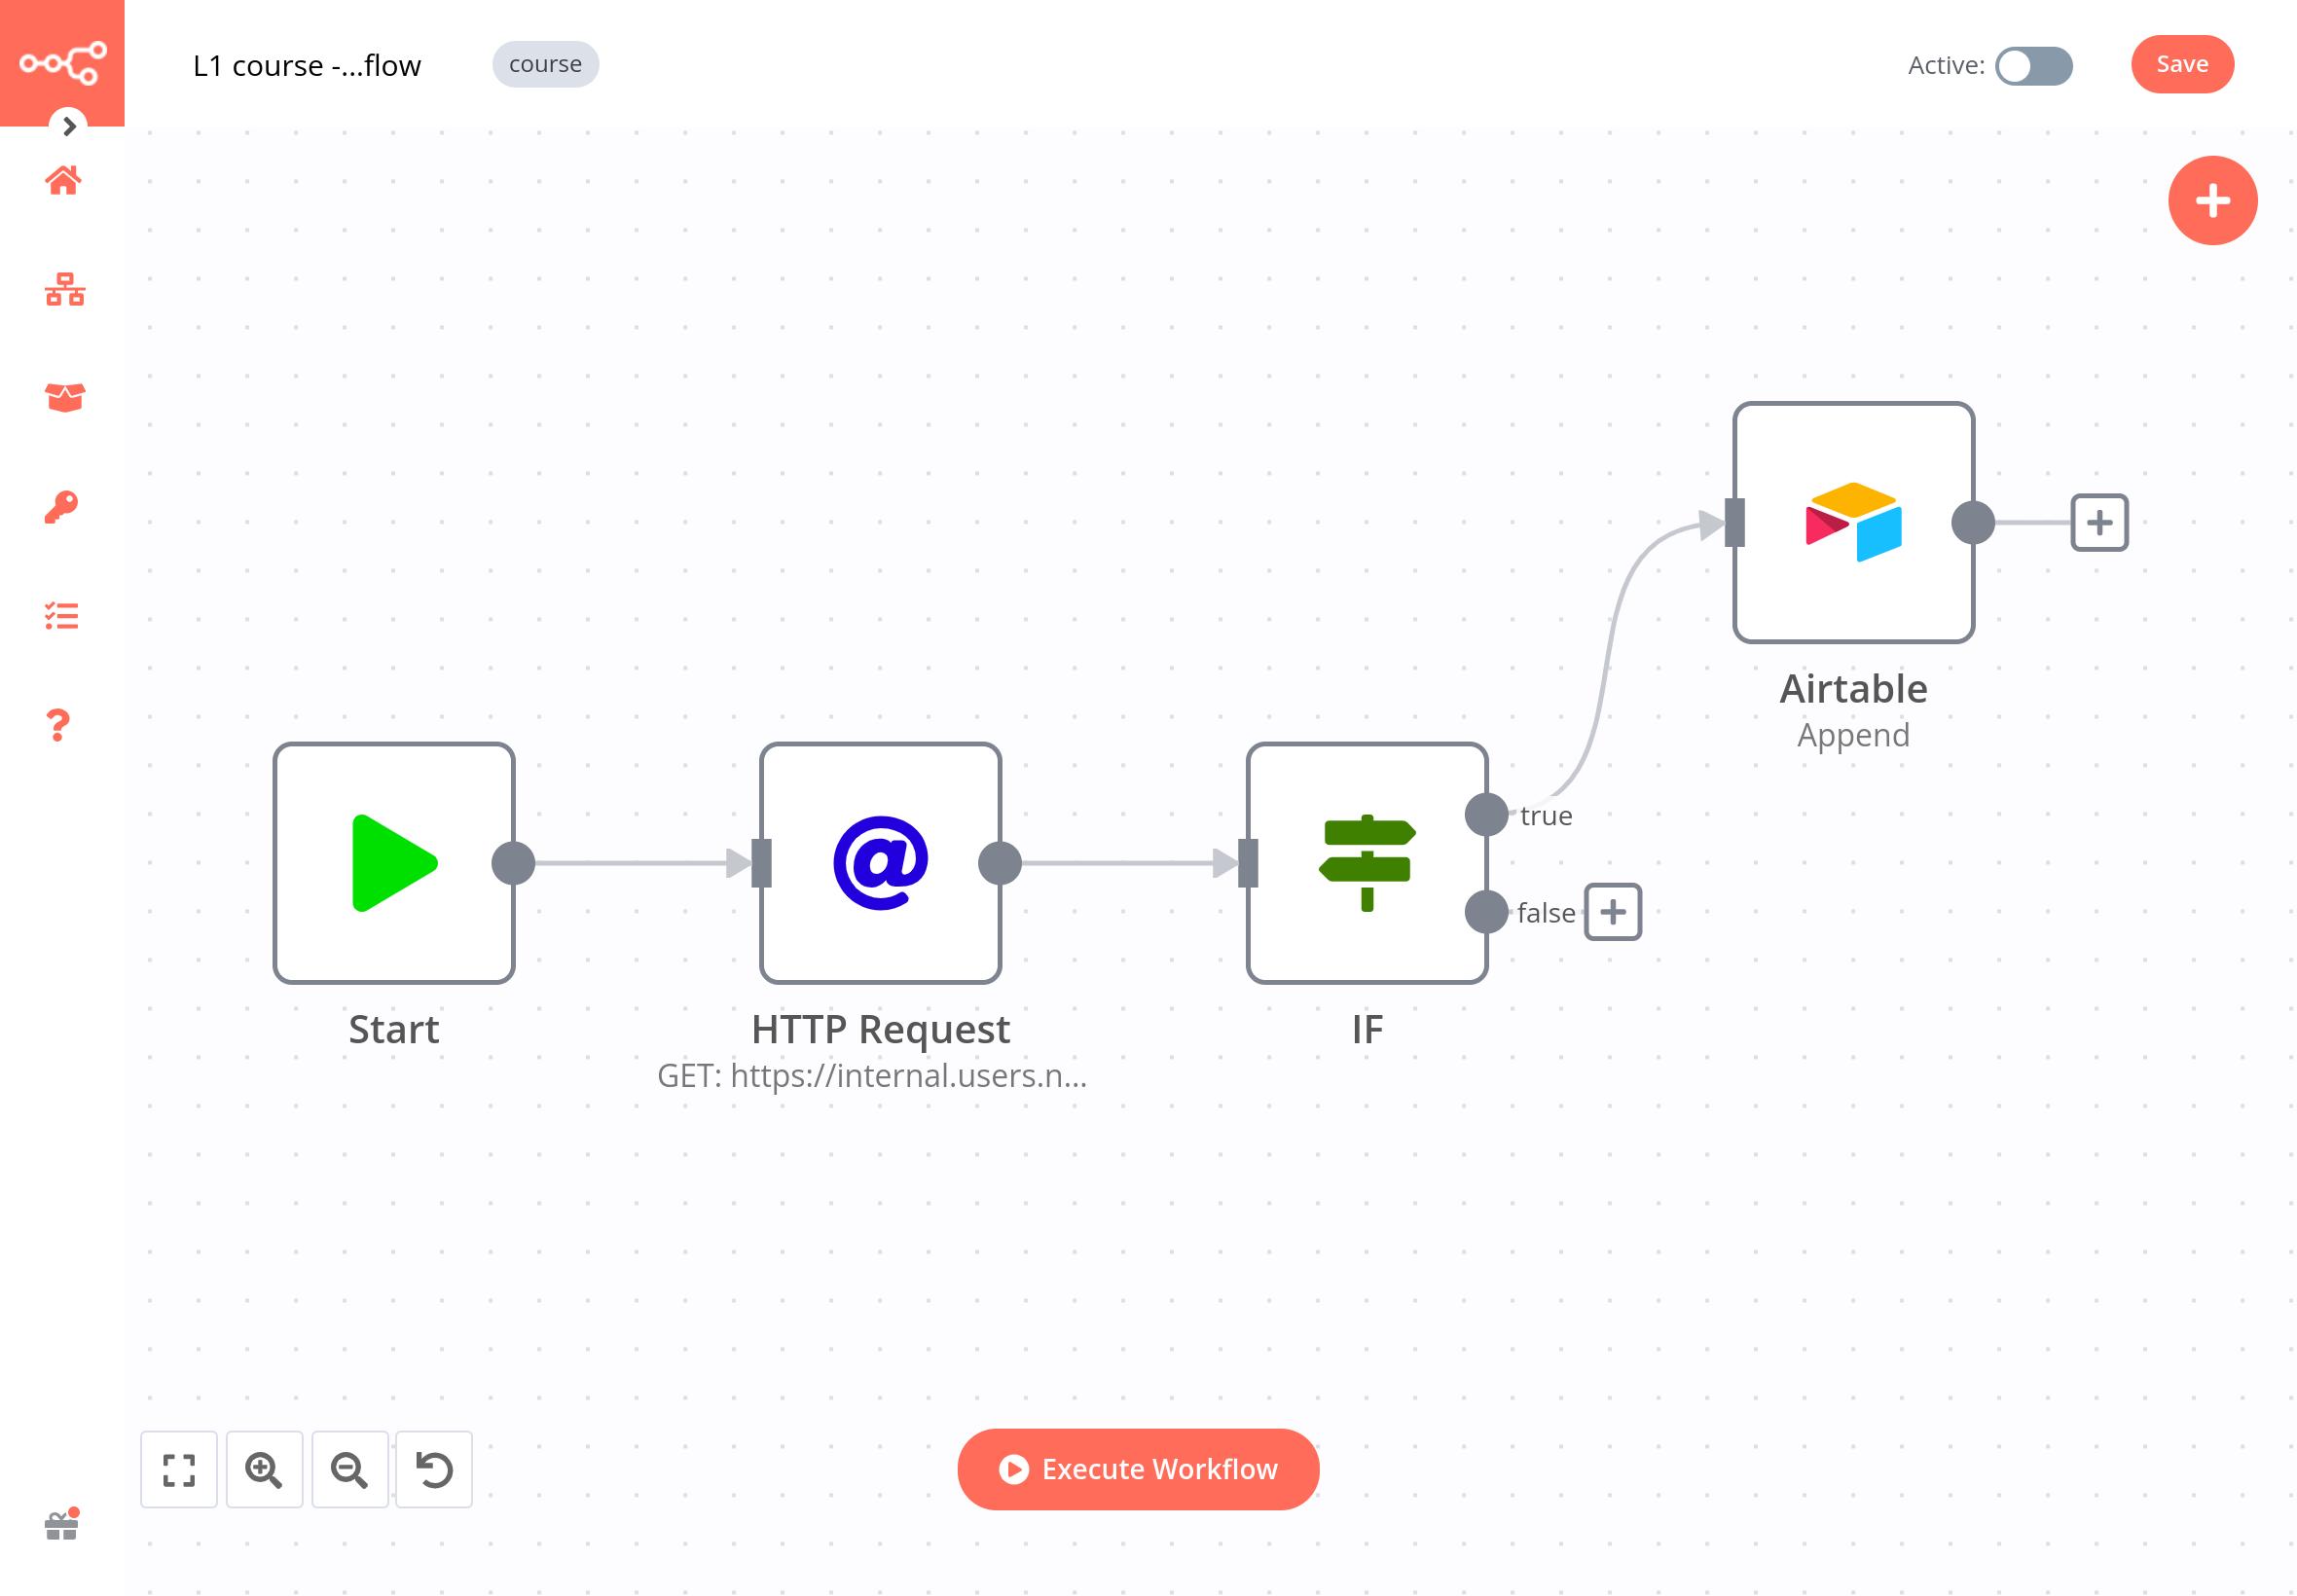 Workflow with the IF node